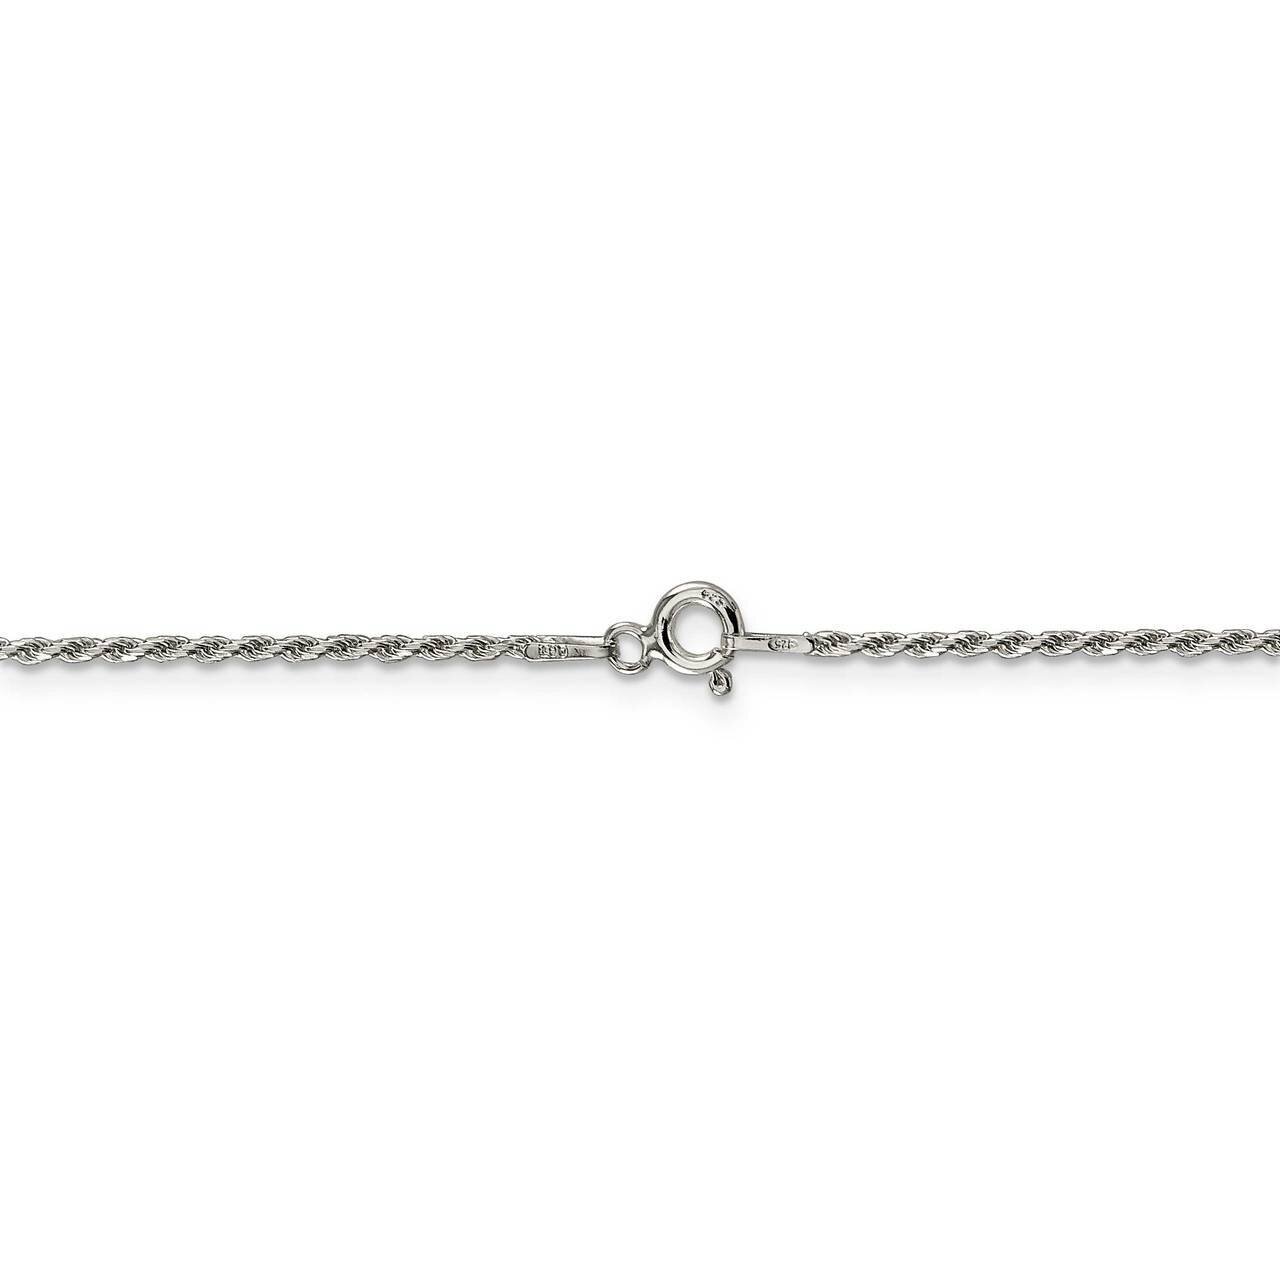 28 Inch 1.5mm Diamond-cut Rope Chain Sterling Silver QDC020-28